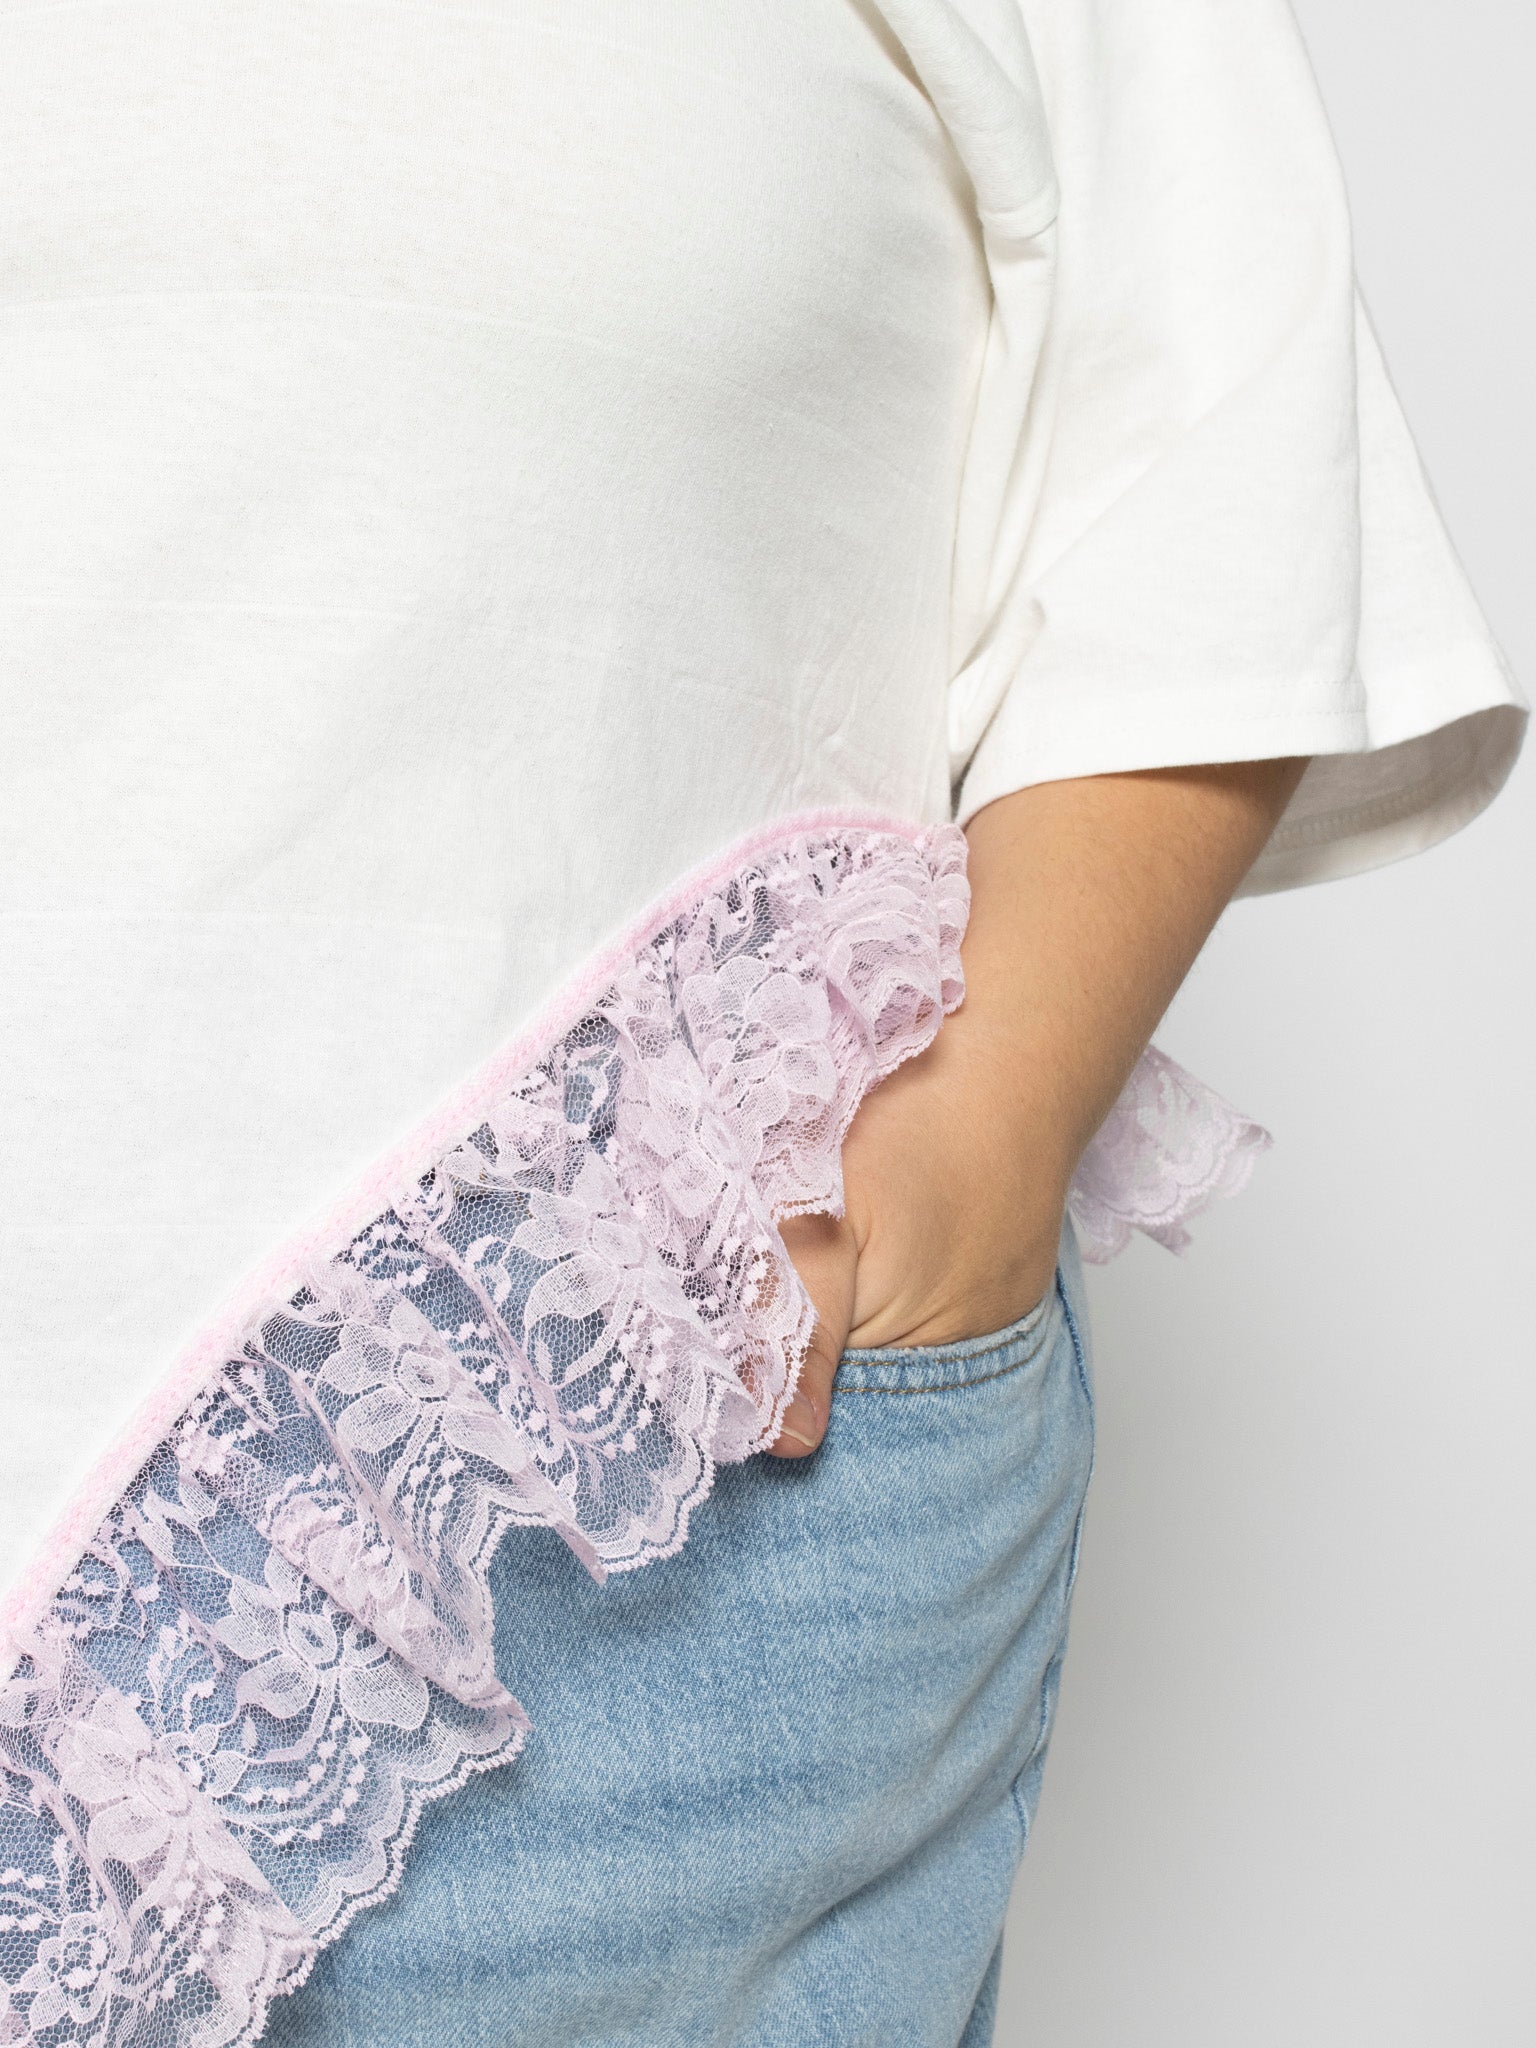 Shop Journal - White Negligee Tee with Pink Lace (3X)